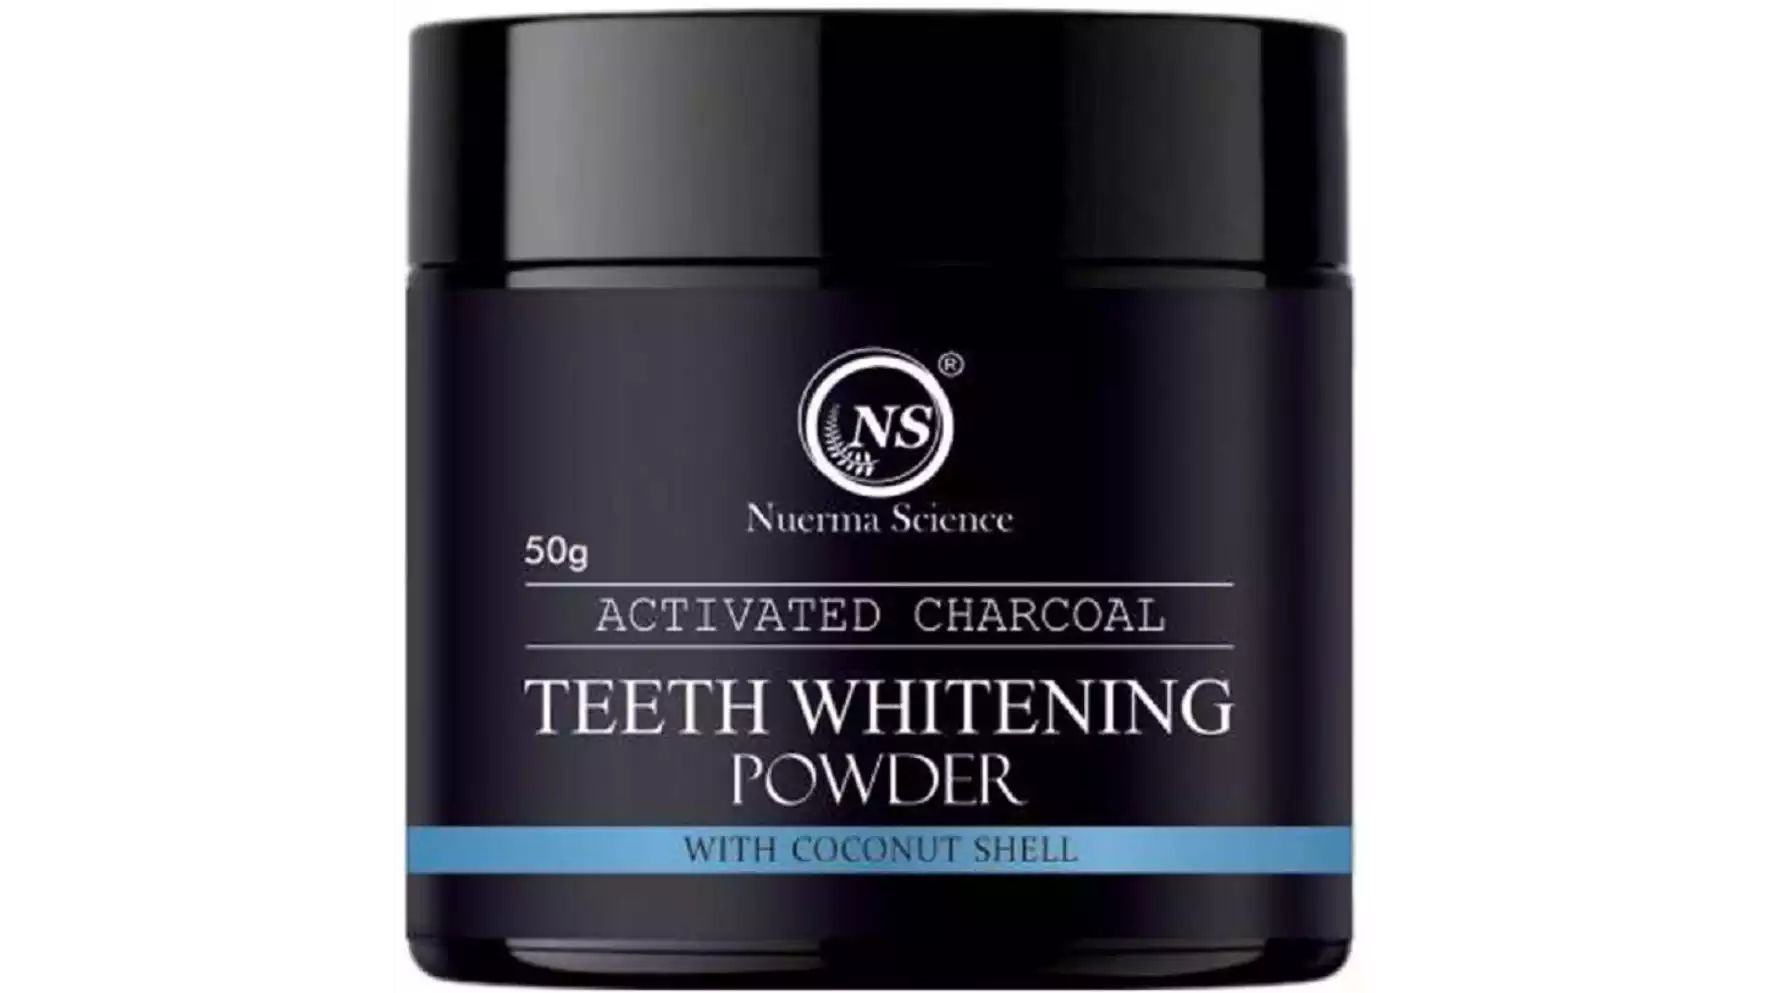 Nuerma Science Activated Charcoal Teeth Whitening Powder (50g)